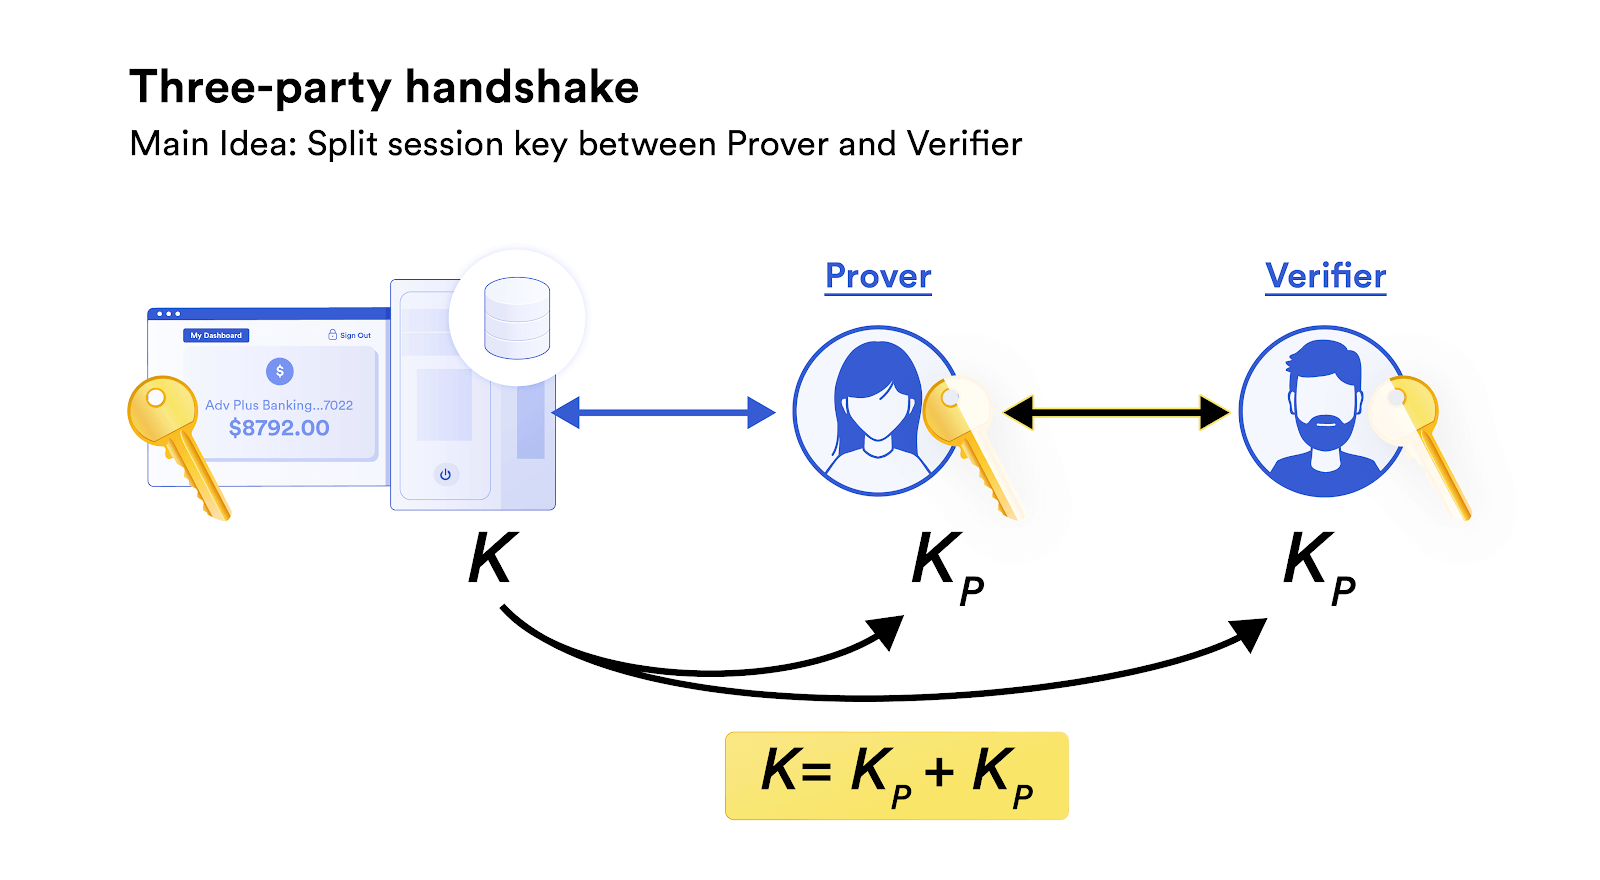 An image showing a three-party handshake.